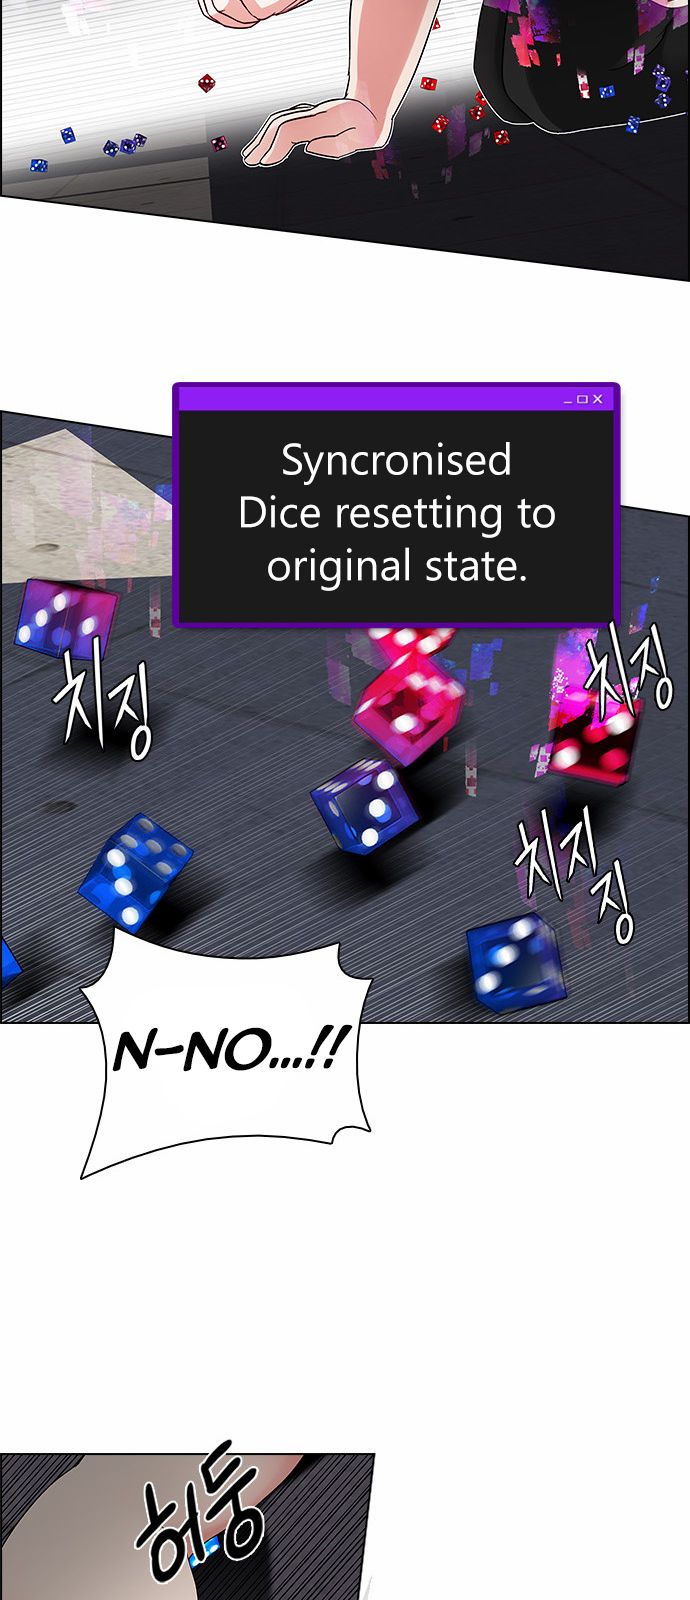 DICE: The Cube that Changes Everything 169